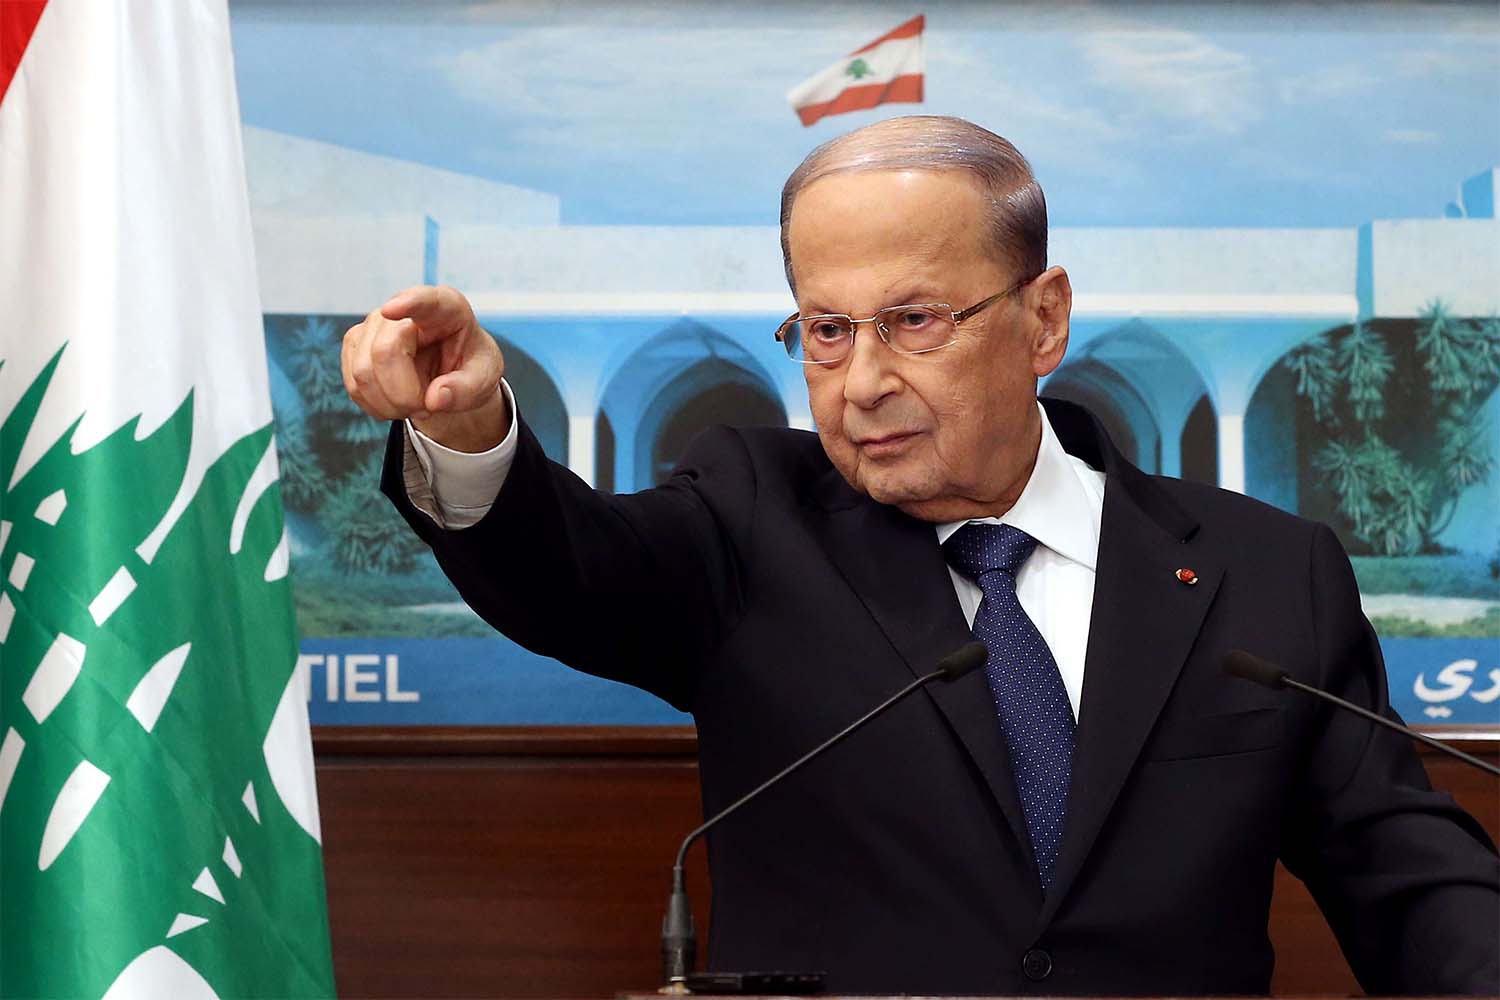 Where are all the reforms? Asked Aoun